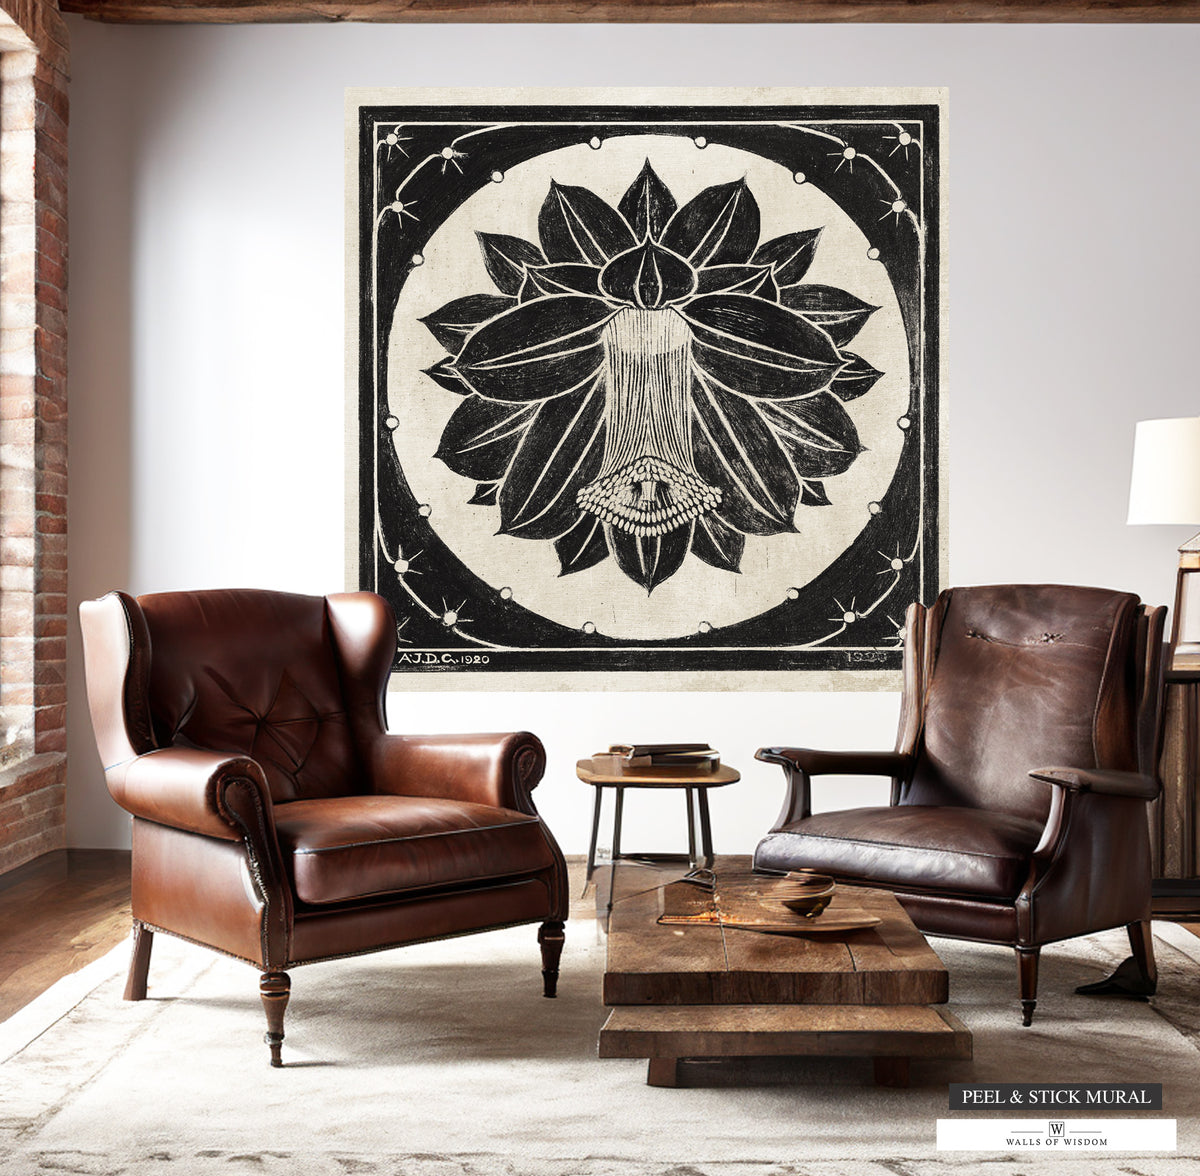 Large wall art featuring a distressed cactus bloom design.